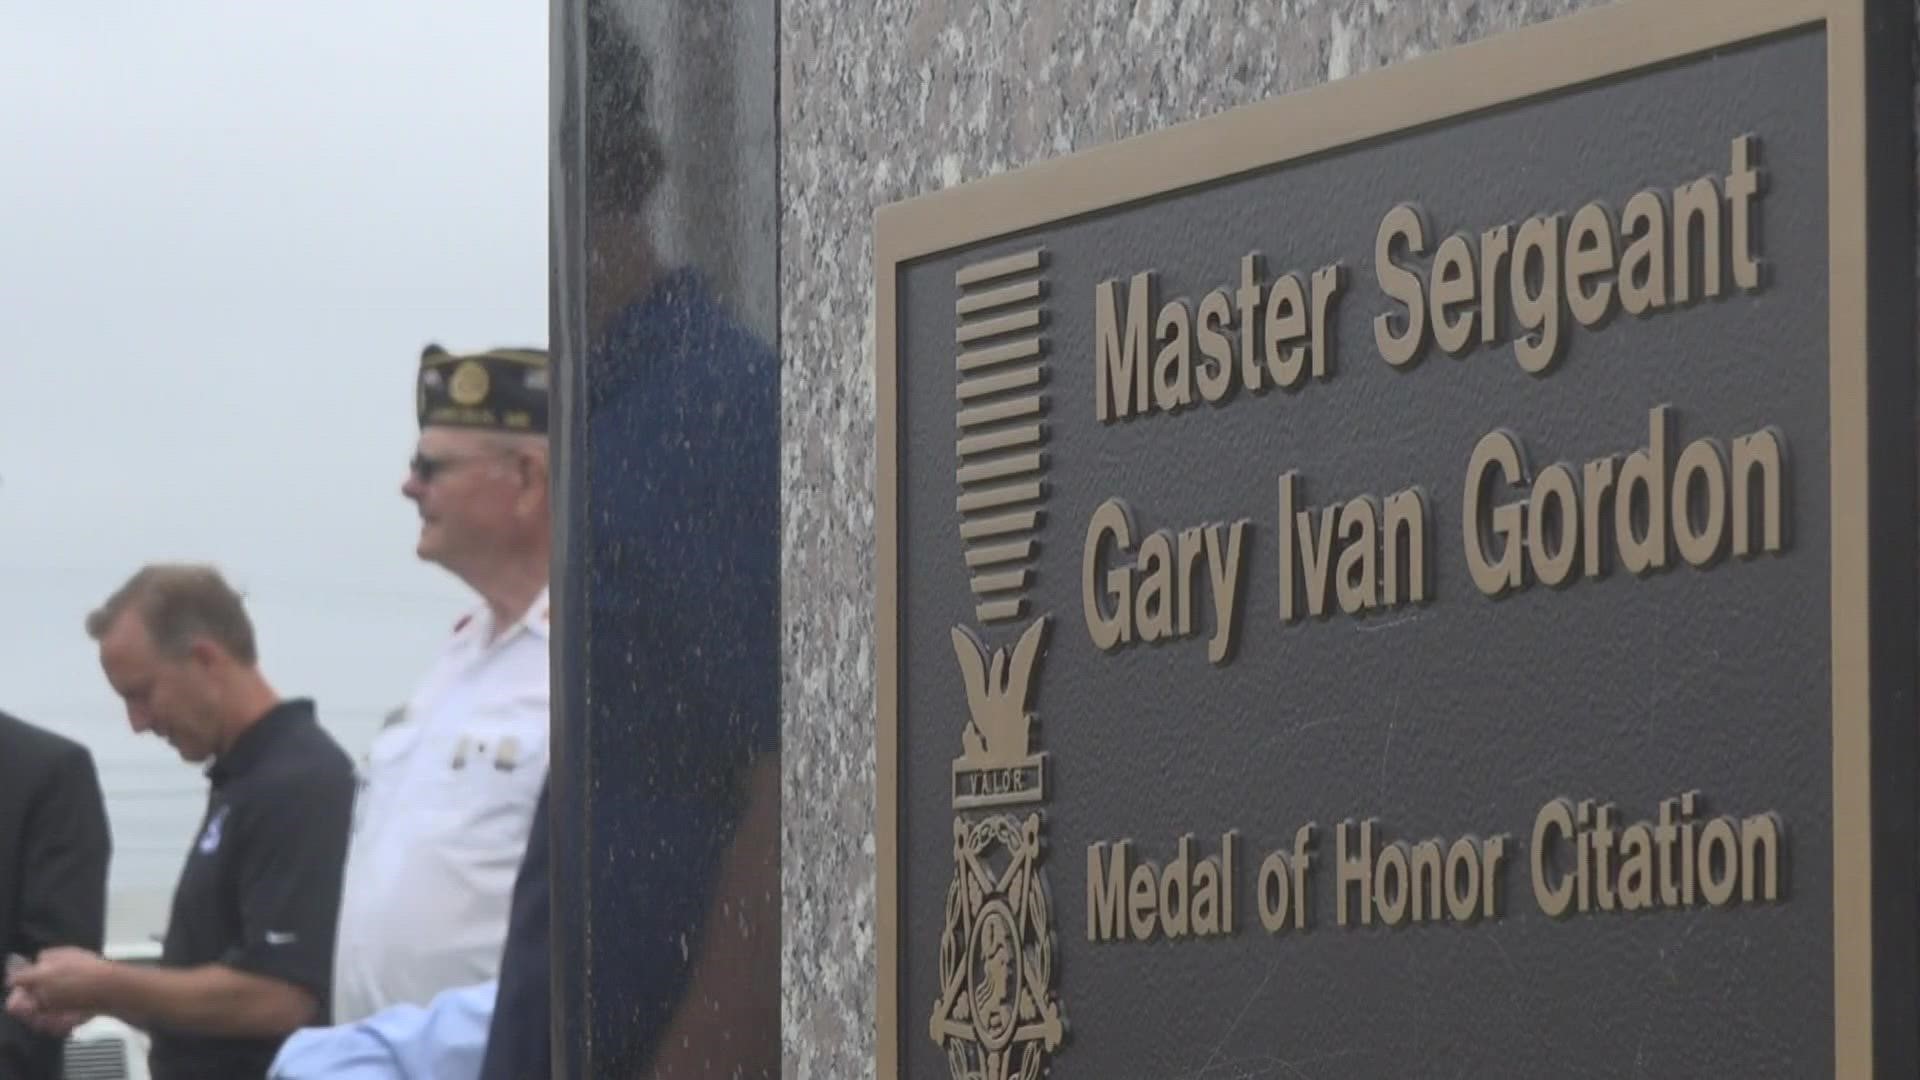 The statue of Master Sergeant Gary Gordon was unveiled today at the Lincoln Veterans Memorial in front of a crowd of family and community members.